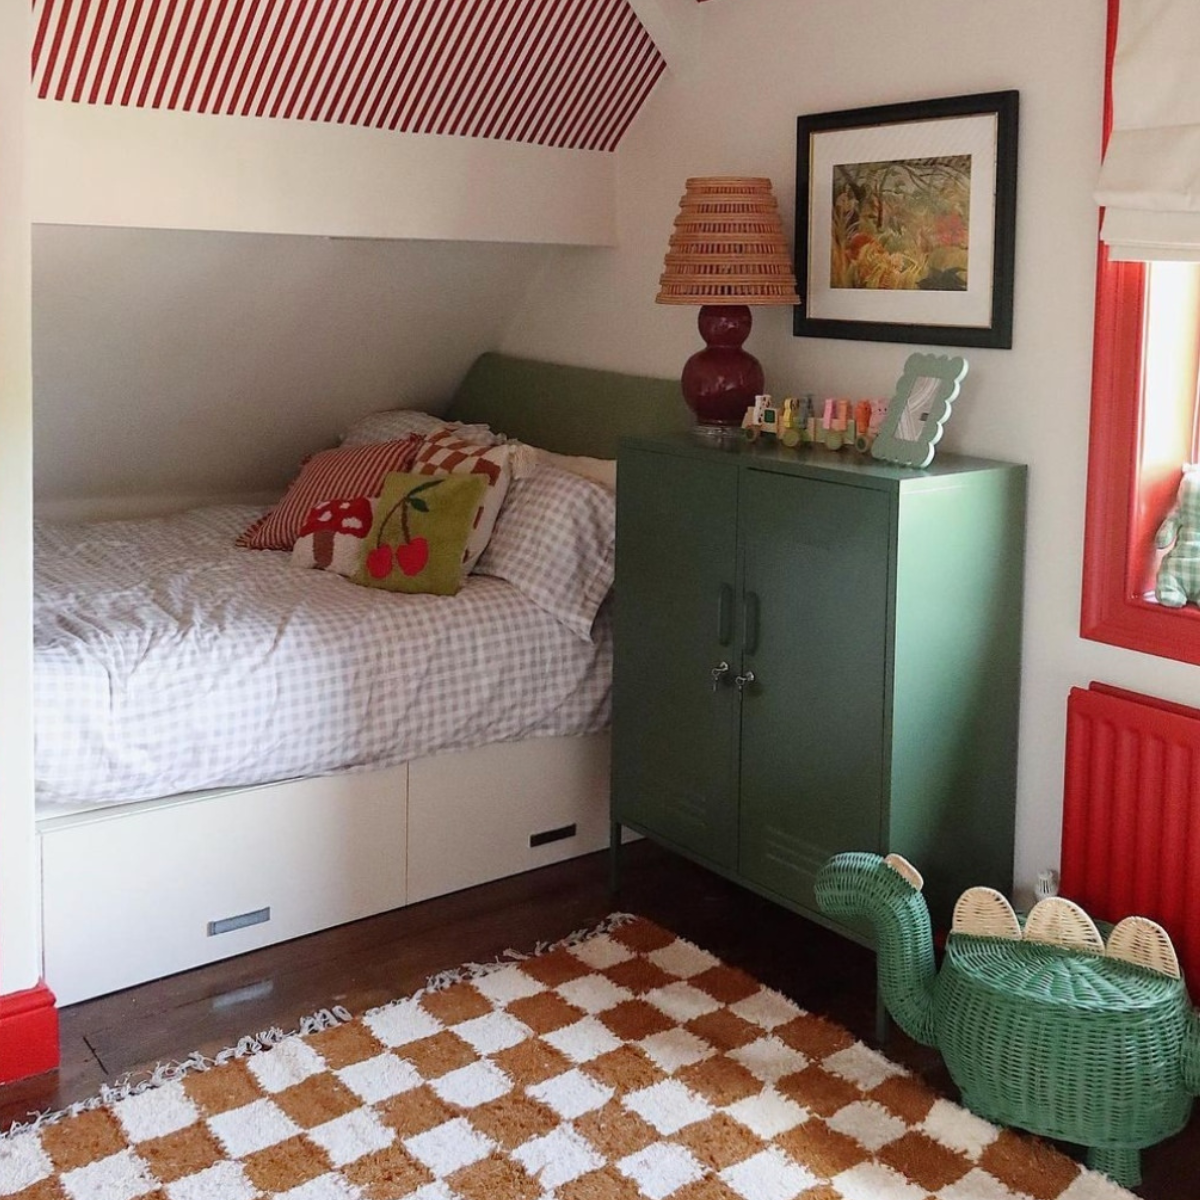 A bed is built-in to the corner of a small room with white walls and red skirting boards. There is an Olive Midi next to the bed and a brown and white checkered rug on the floor, with pops of red throughout the room.